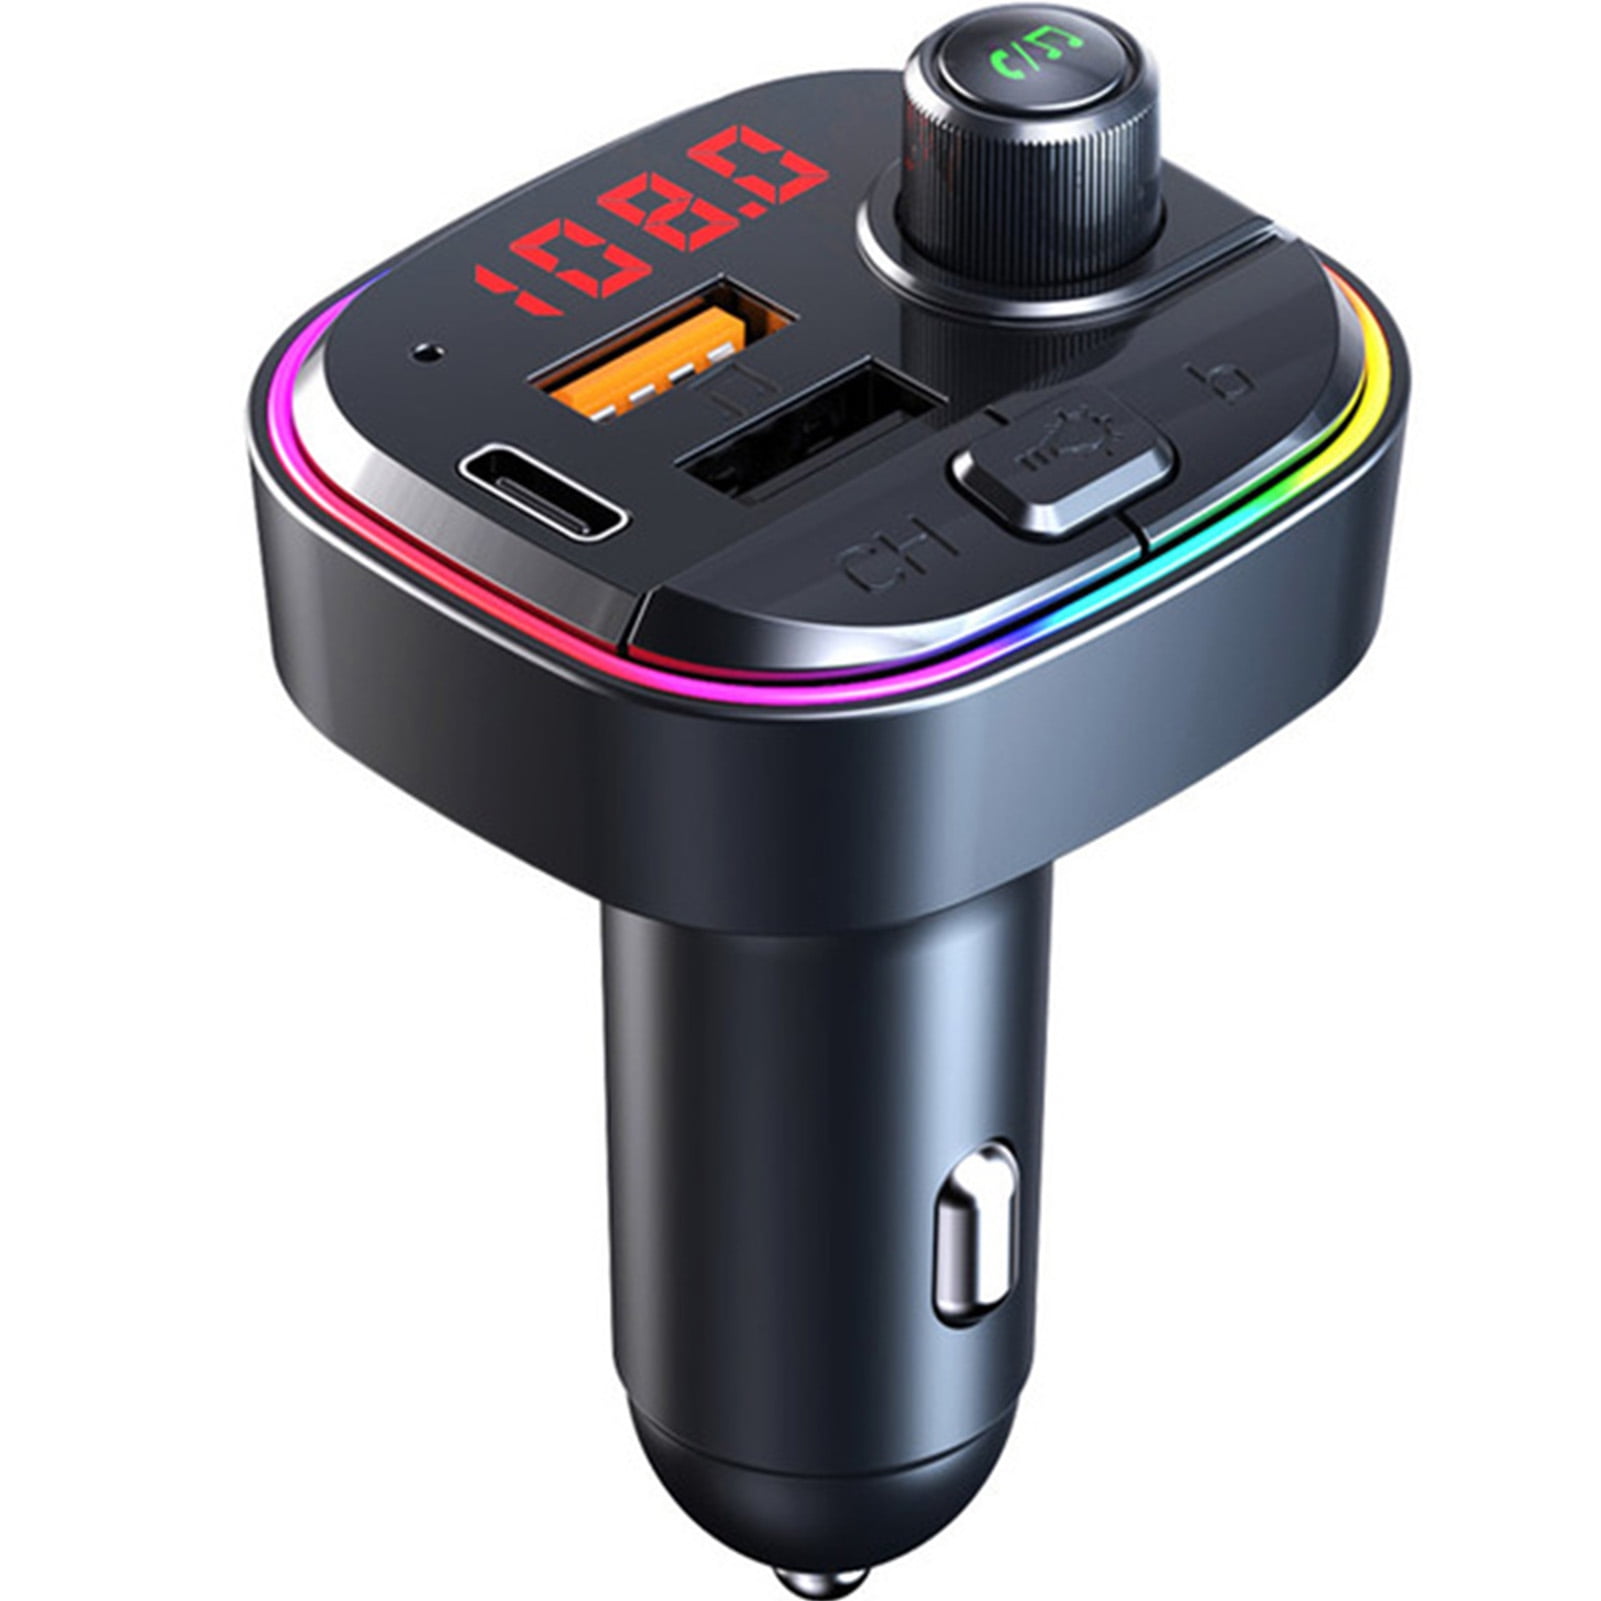 Bluetooth FM Audio Adapter Music Player Sopmit BT5.0 Bluetooth FM Transmitter for Car Hands-Free Calling Hi-Fi Music Support U Disk/TF Card QC3.0 Quick Charge & LED Backlit Bluetooth Car Adapter 